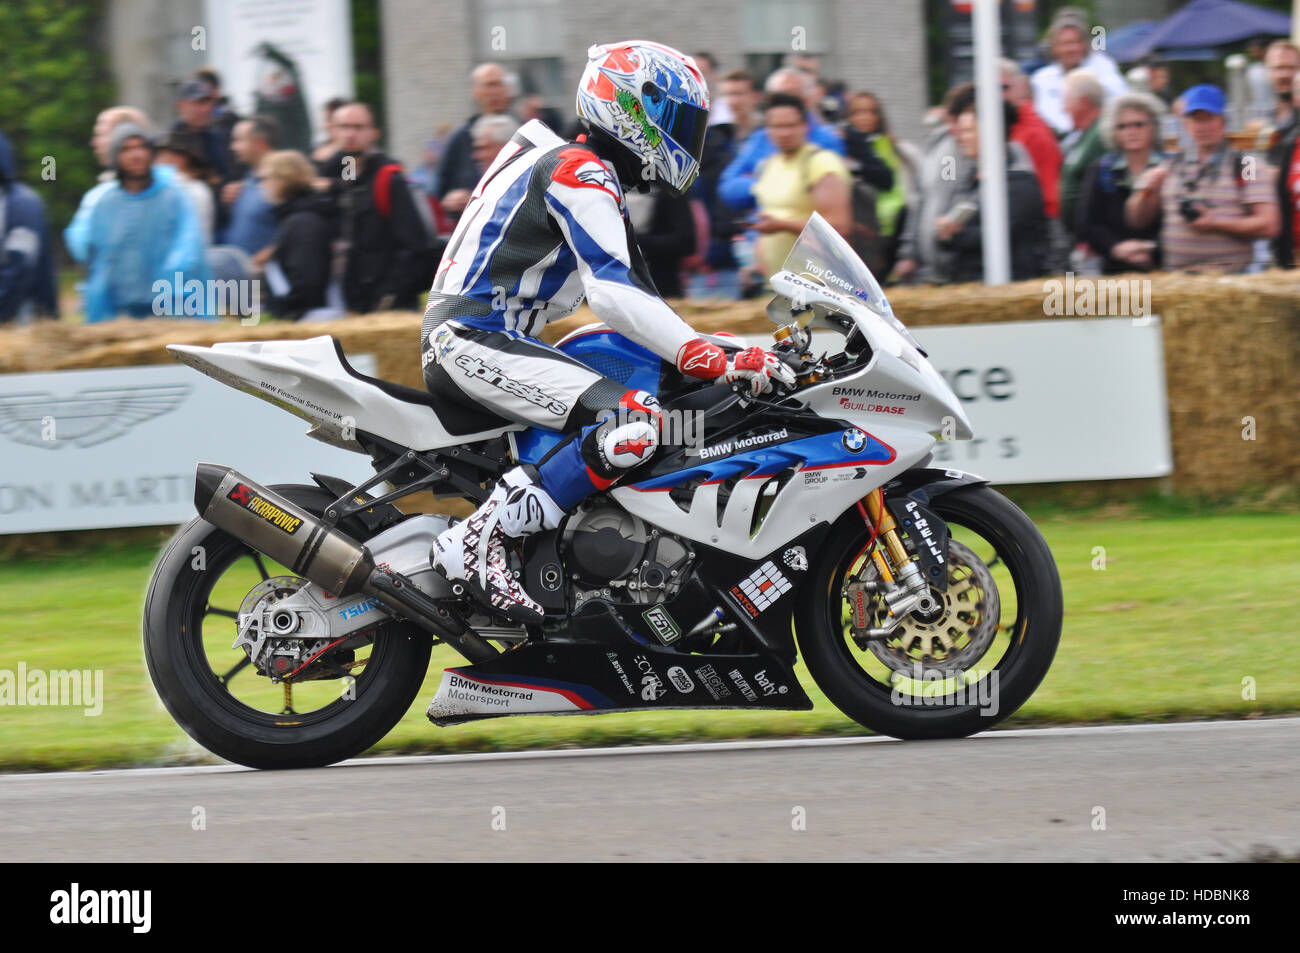 Troy Corser riding a BMW S1000RR at the 2016 Goodwood Festival of Speed  Stock Photo - Alamy